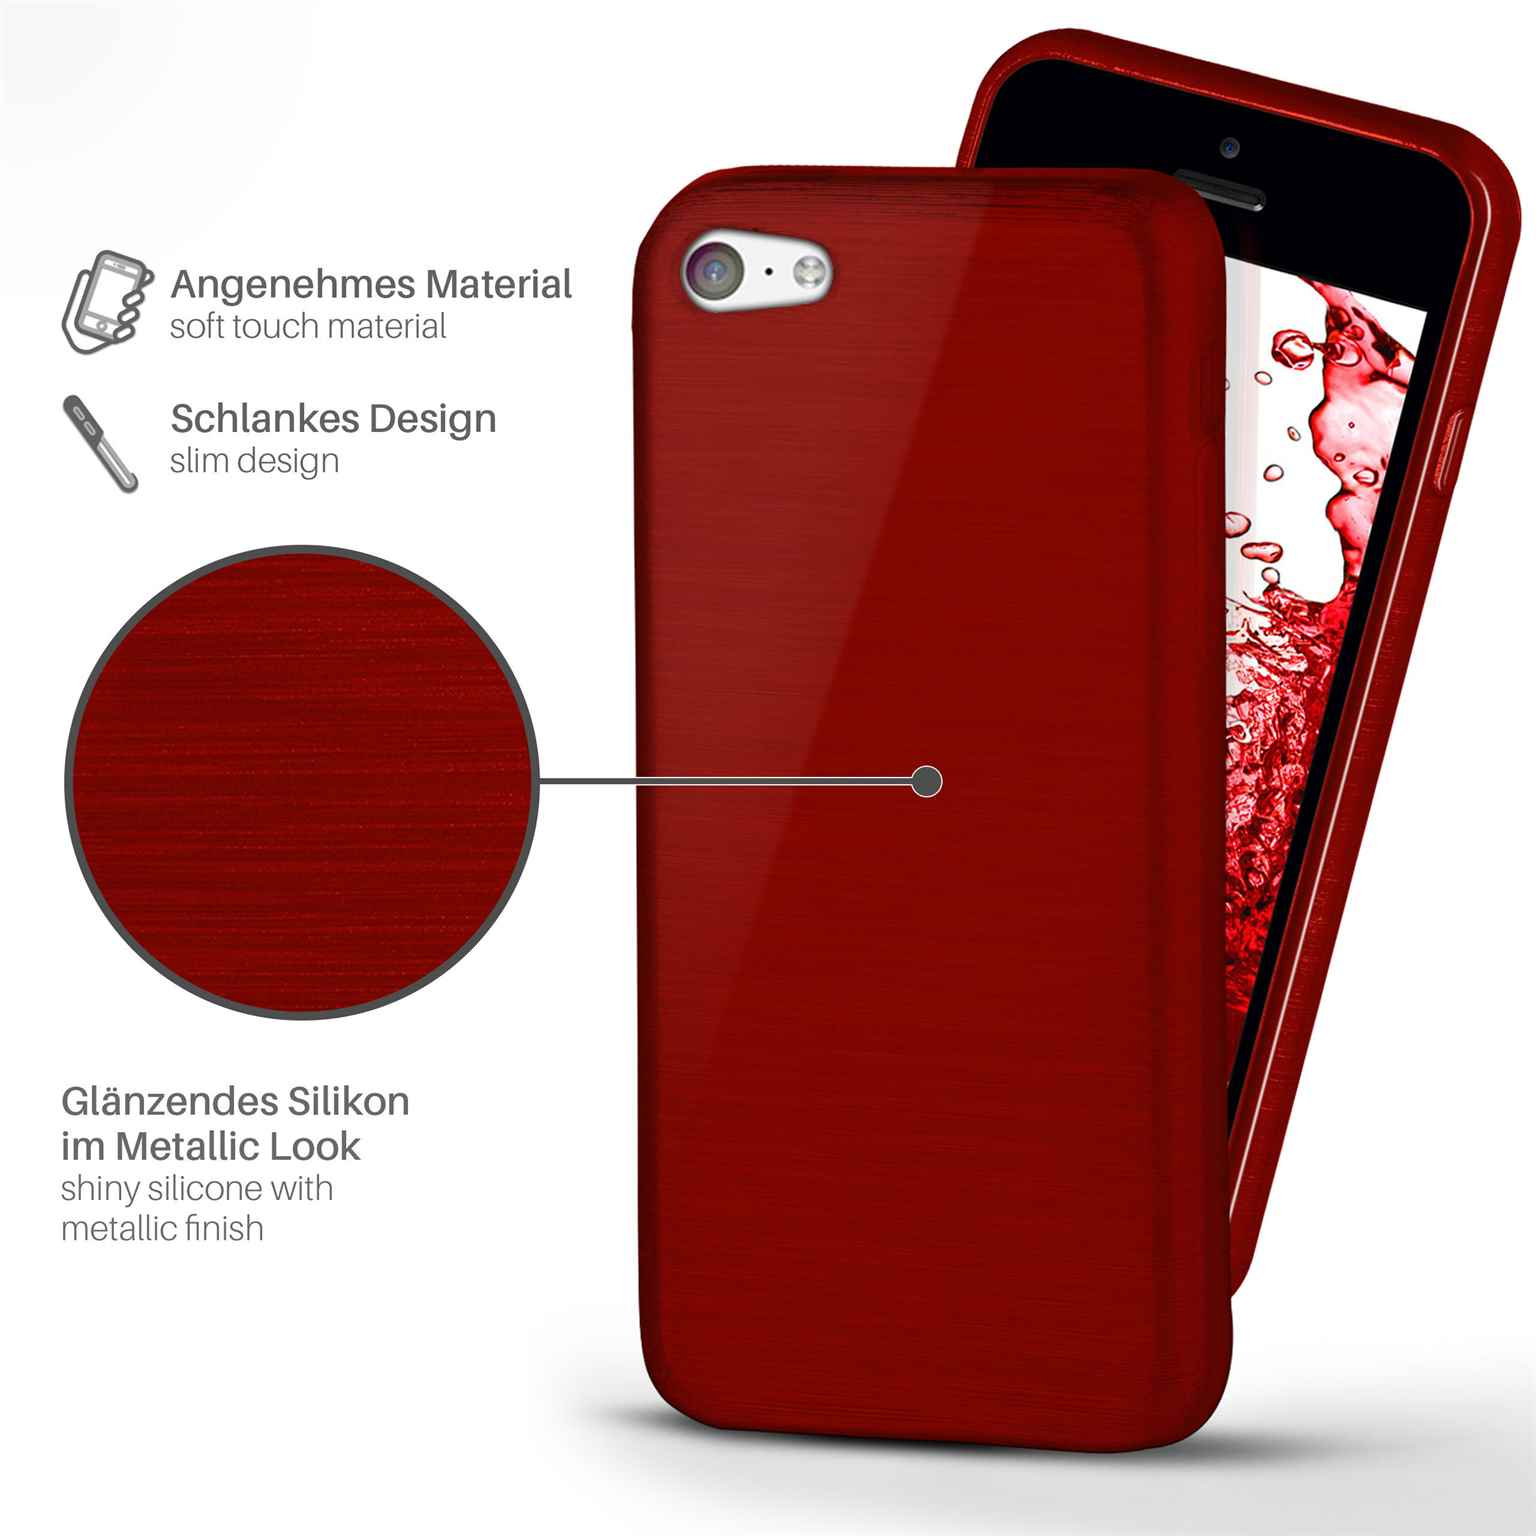 MOEX 5c, Brushed Case, iPhone Apple, Crimson-Red Backcover,